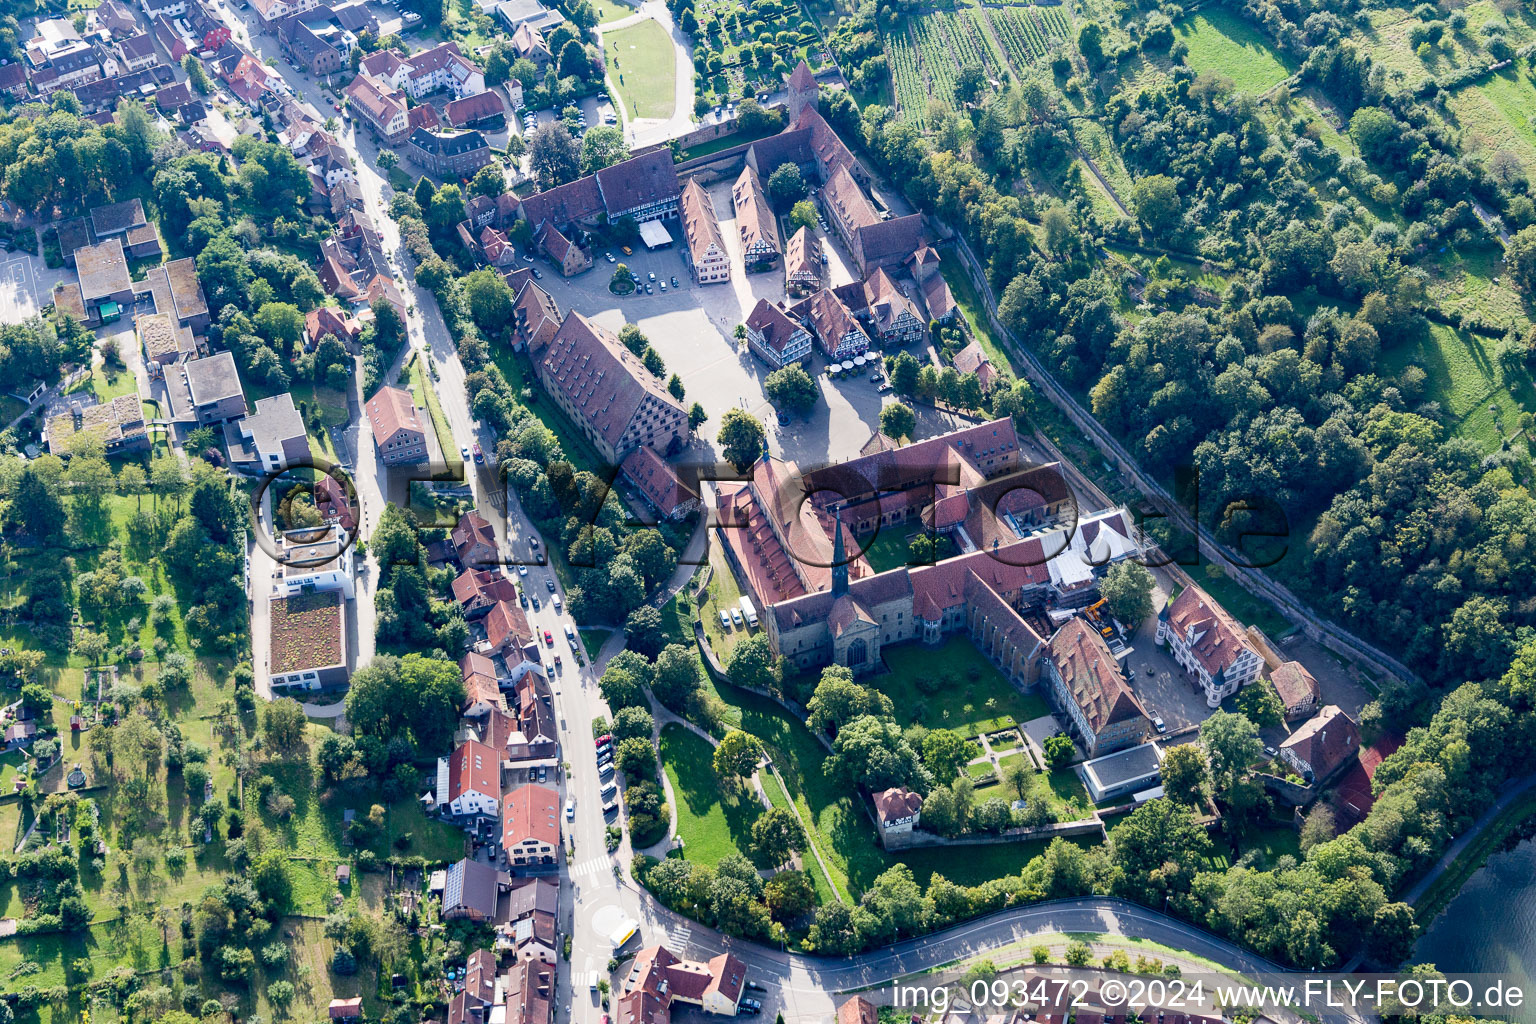 Drone image of Maulbronn in the state Baden-Wuerttemberg, Germany